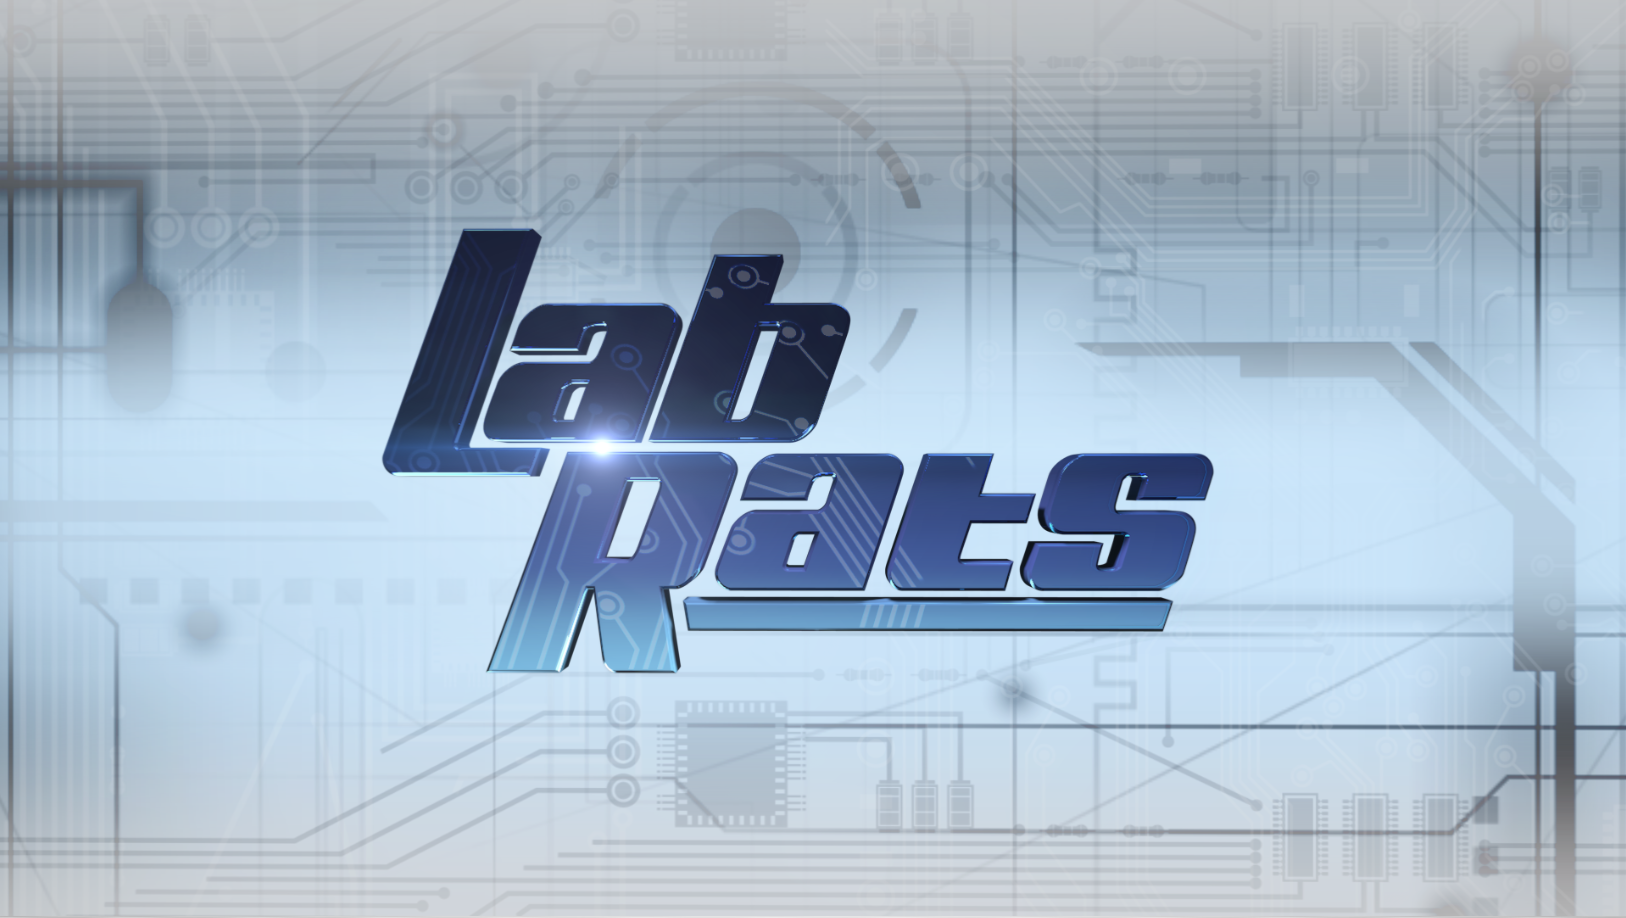 the lab rats download